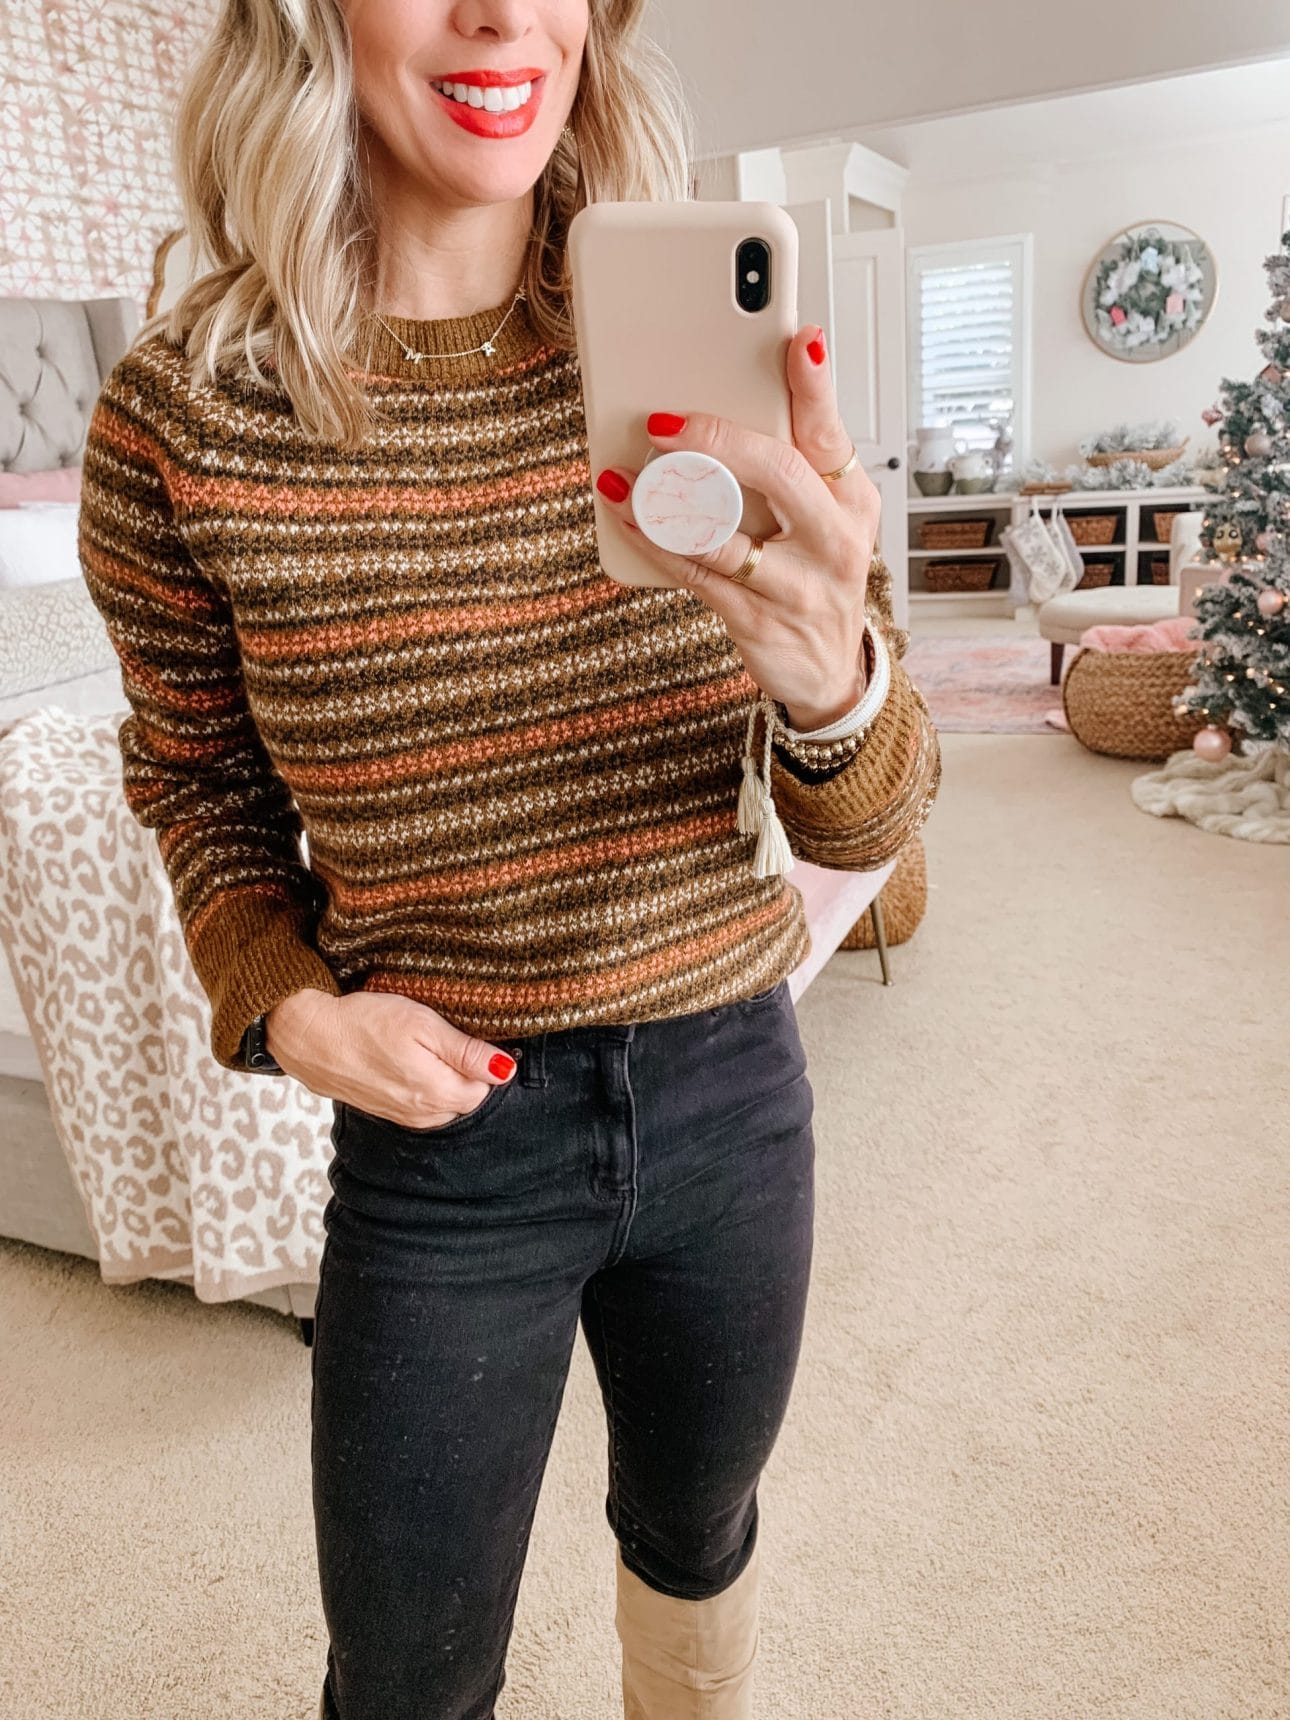 Amazon Fashion, Sweater, Jeans, Boots 